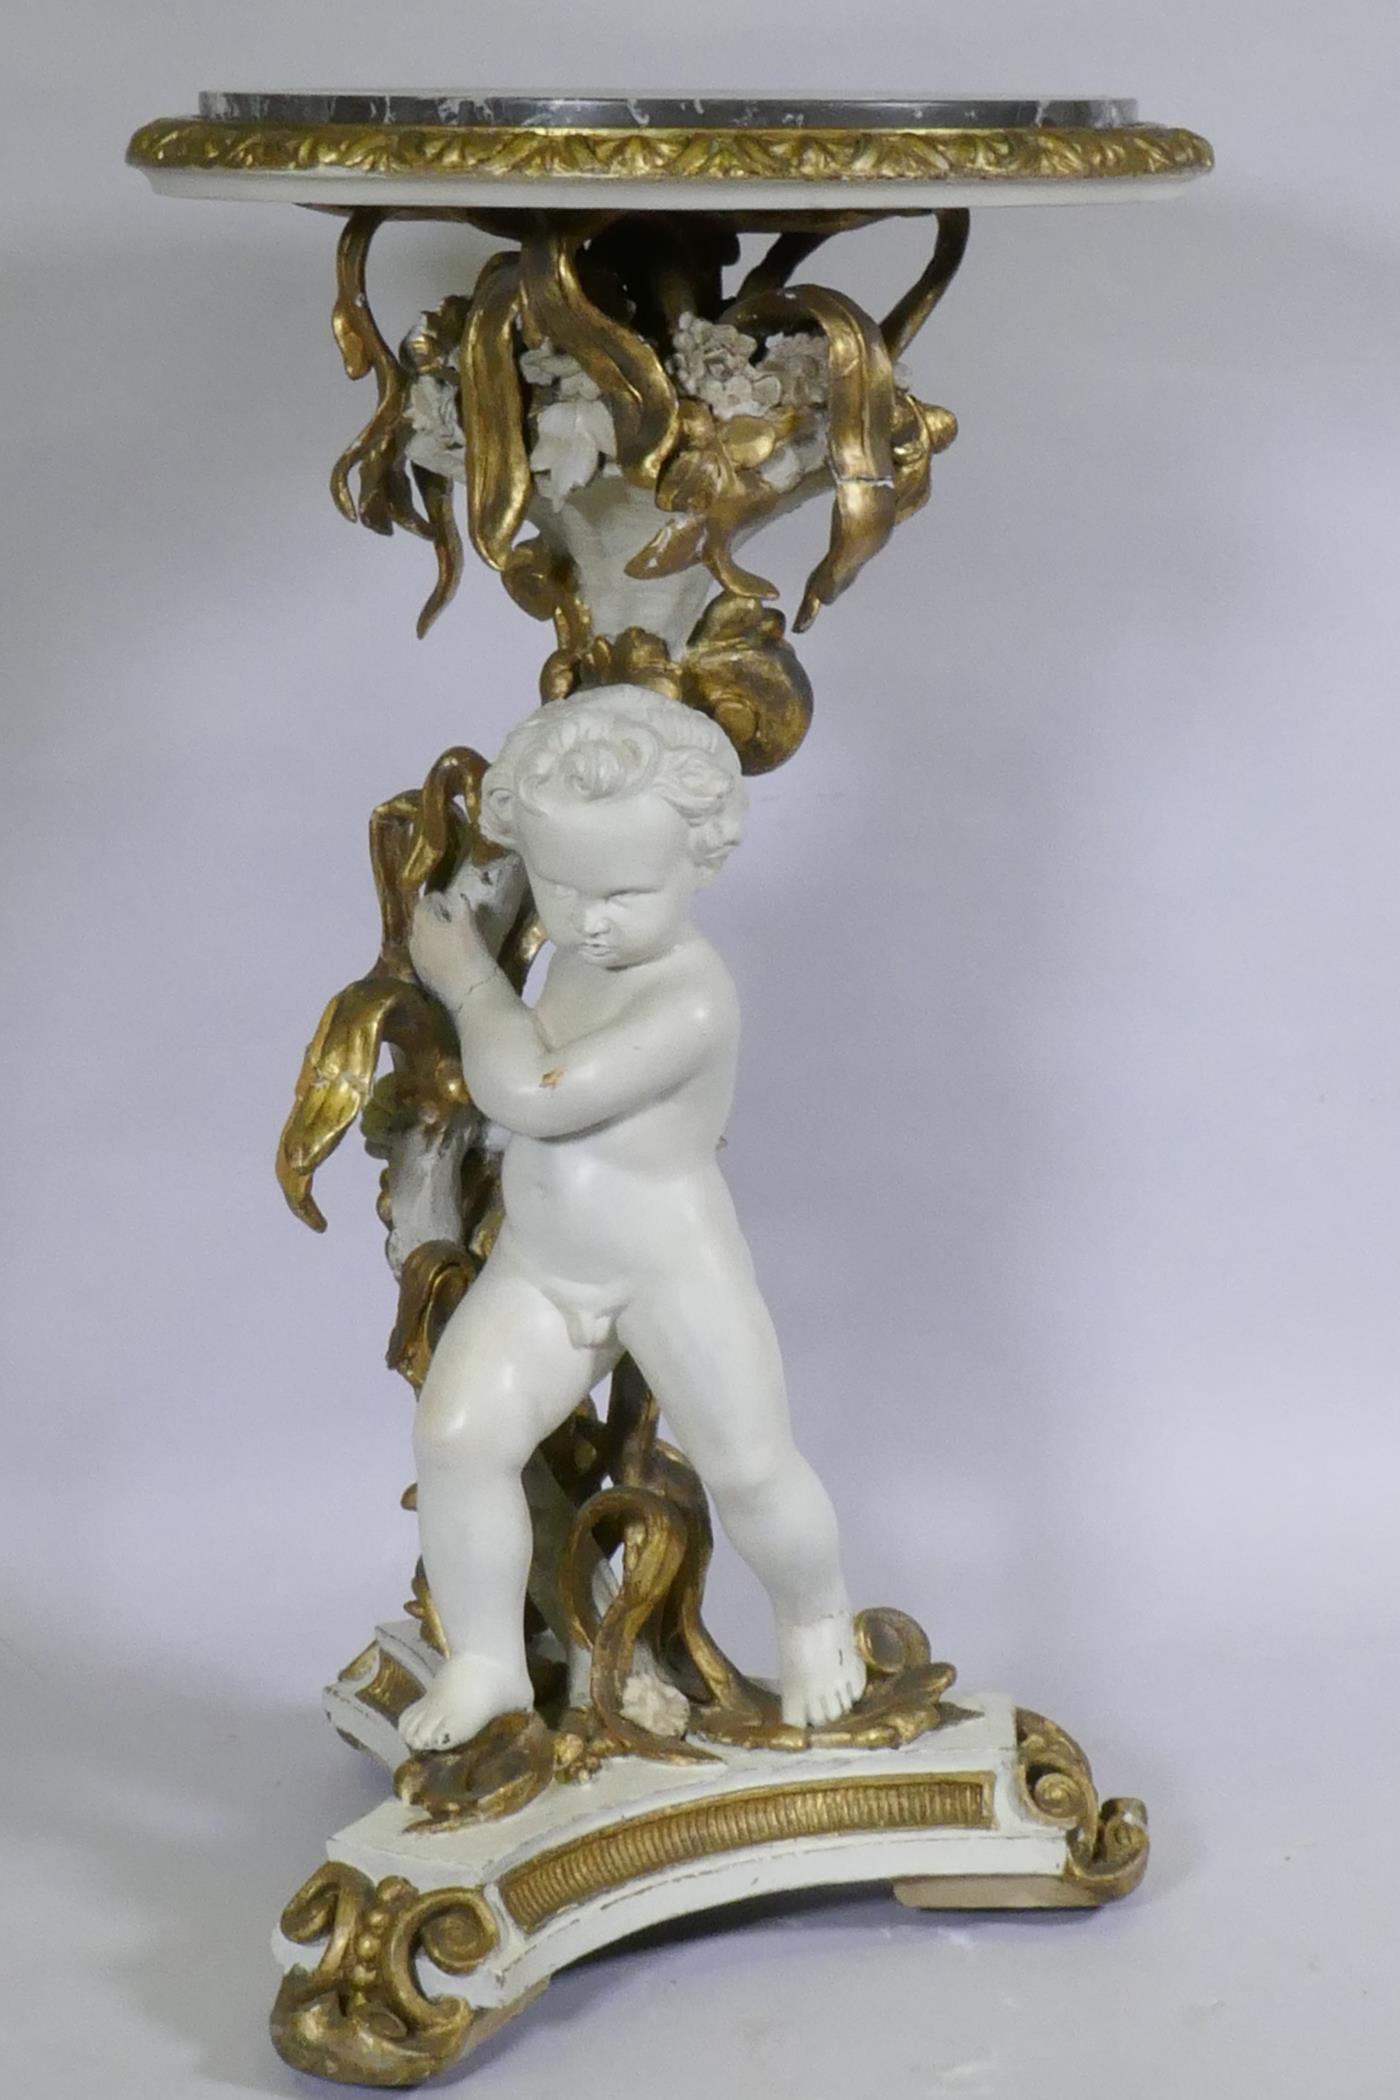 C19th Italian table/stand with painted and parcel gilt decoration in the form of a putto bearing a - Image 2 of 8